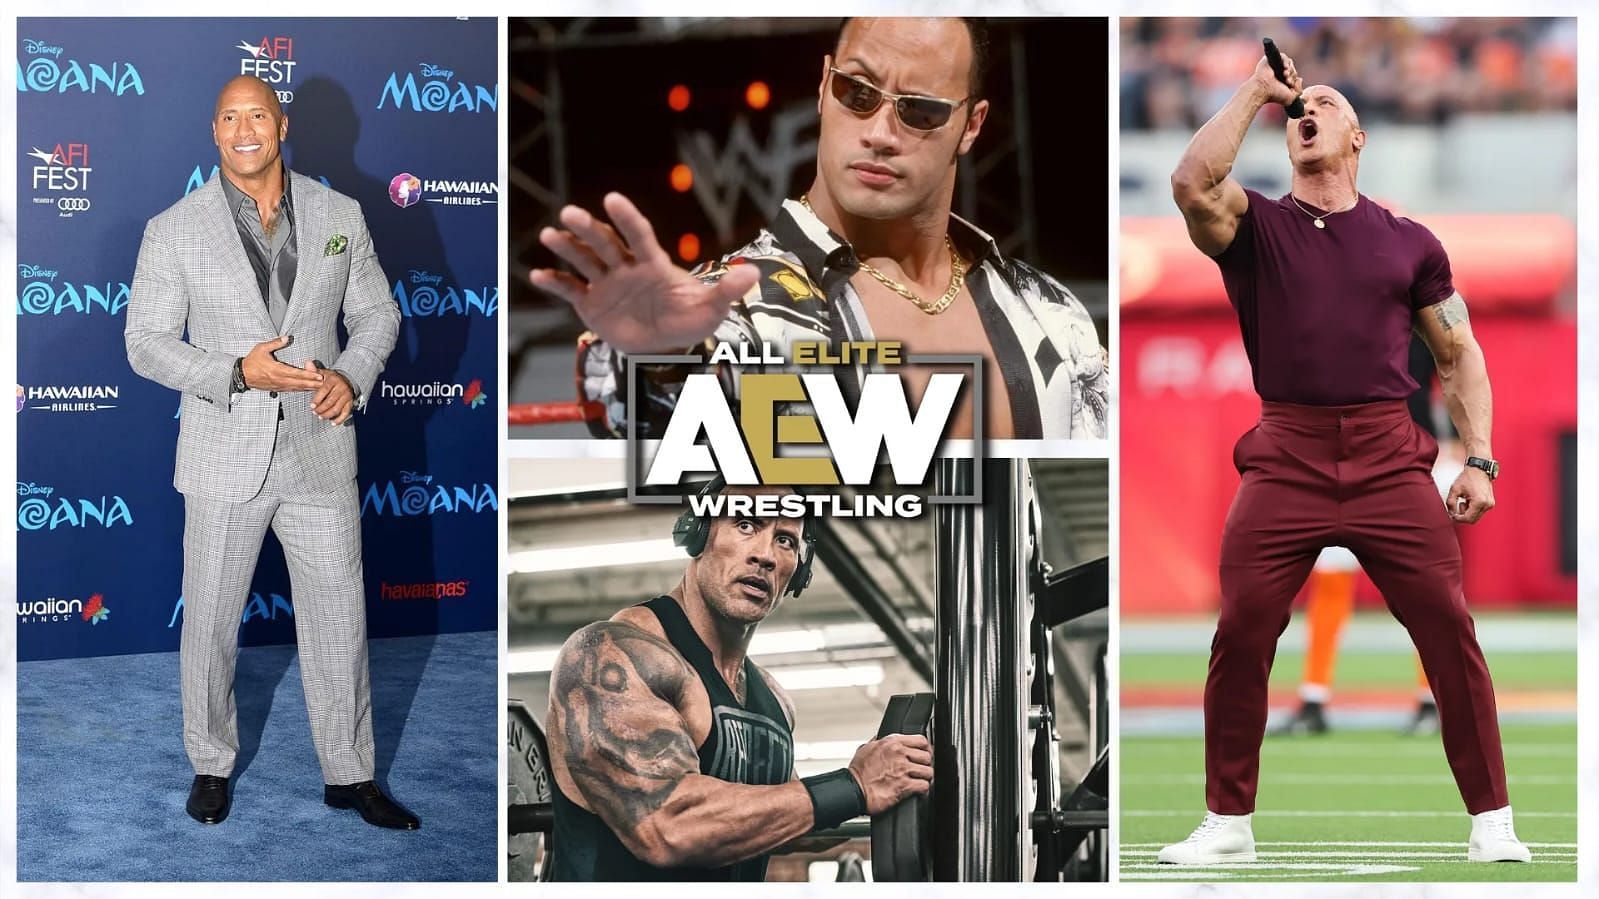 The Rock is a former WWE Superstar